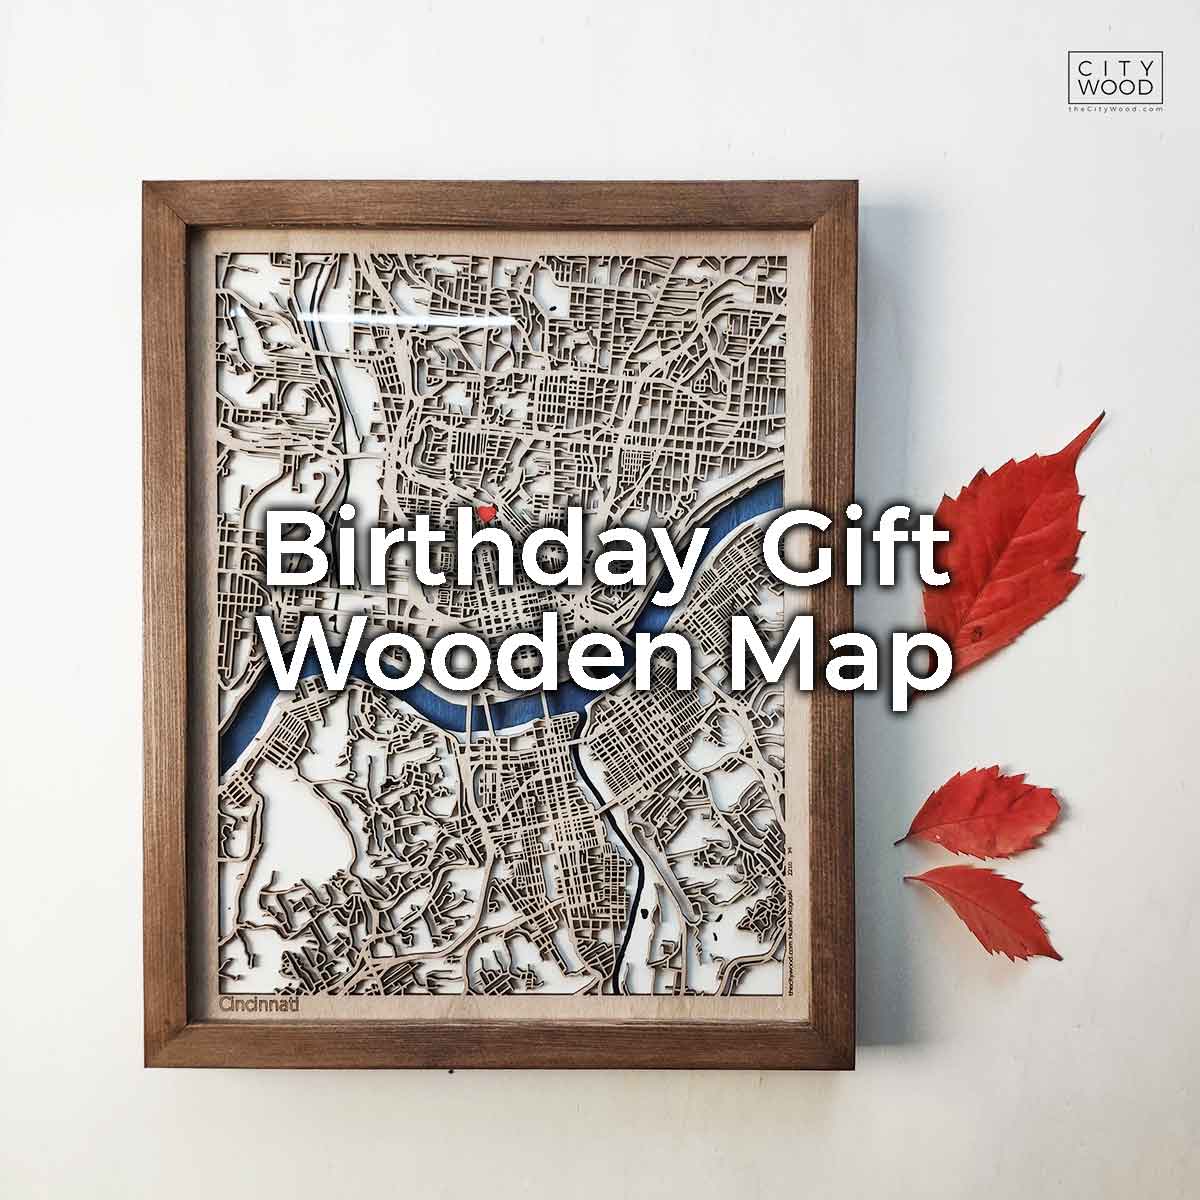 Birthday Gift Wooden Map by CityWood - Custom Wood Map Art - Unique Laser Cut Engraved - Anniversary Gift